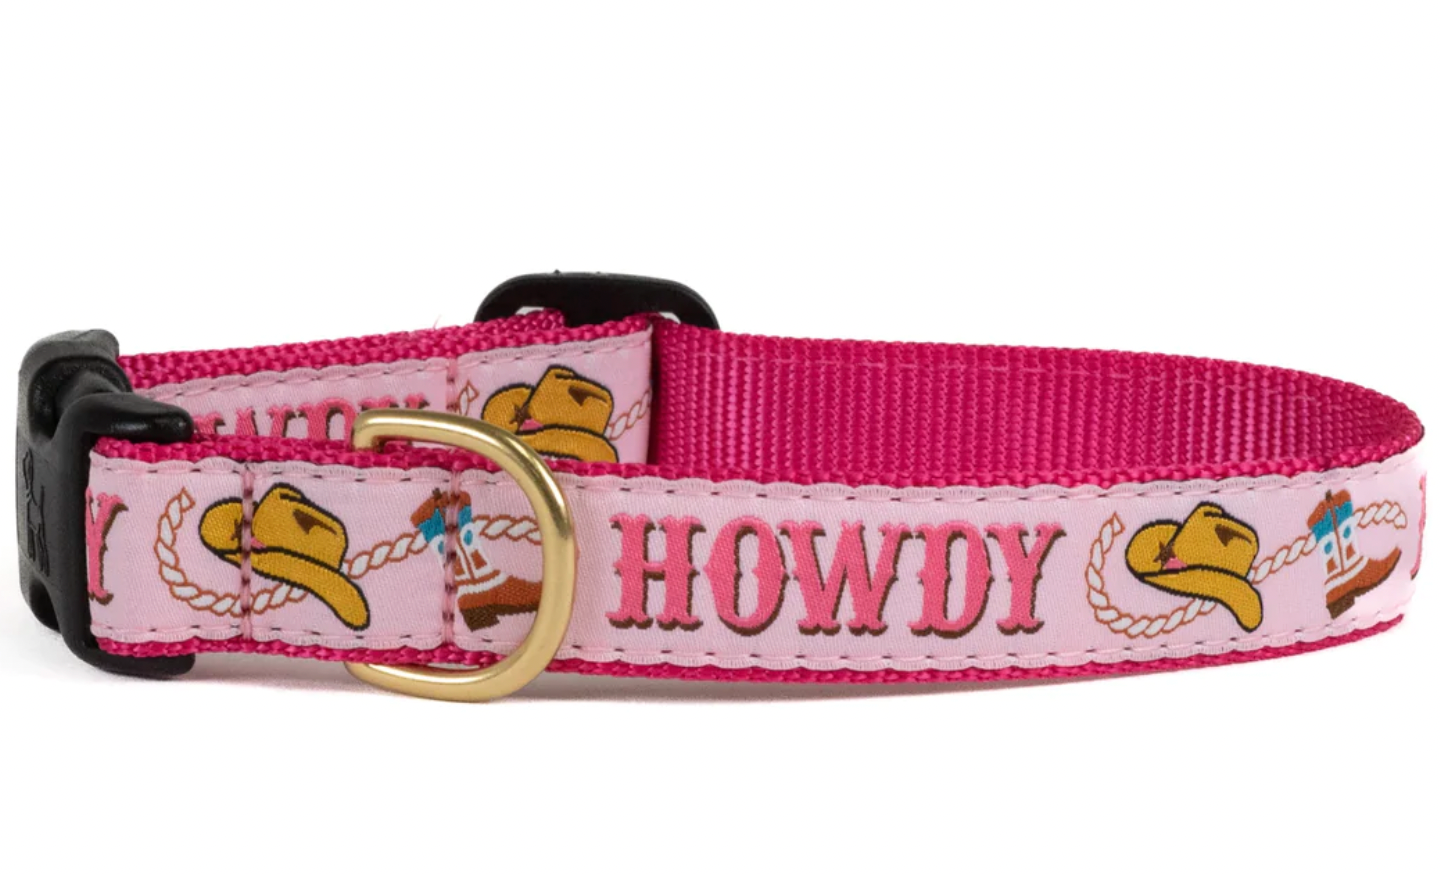 Up Country "Howdy" Dog Collar, Pink